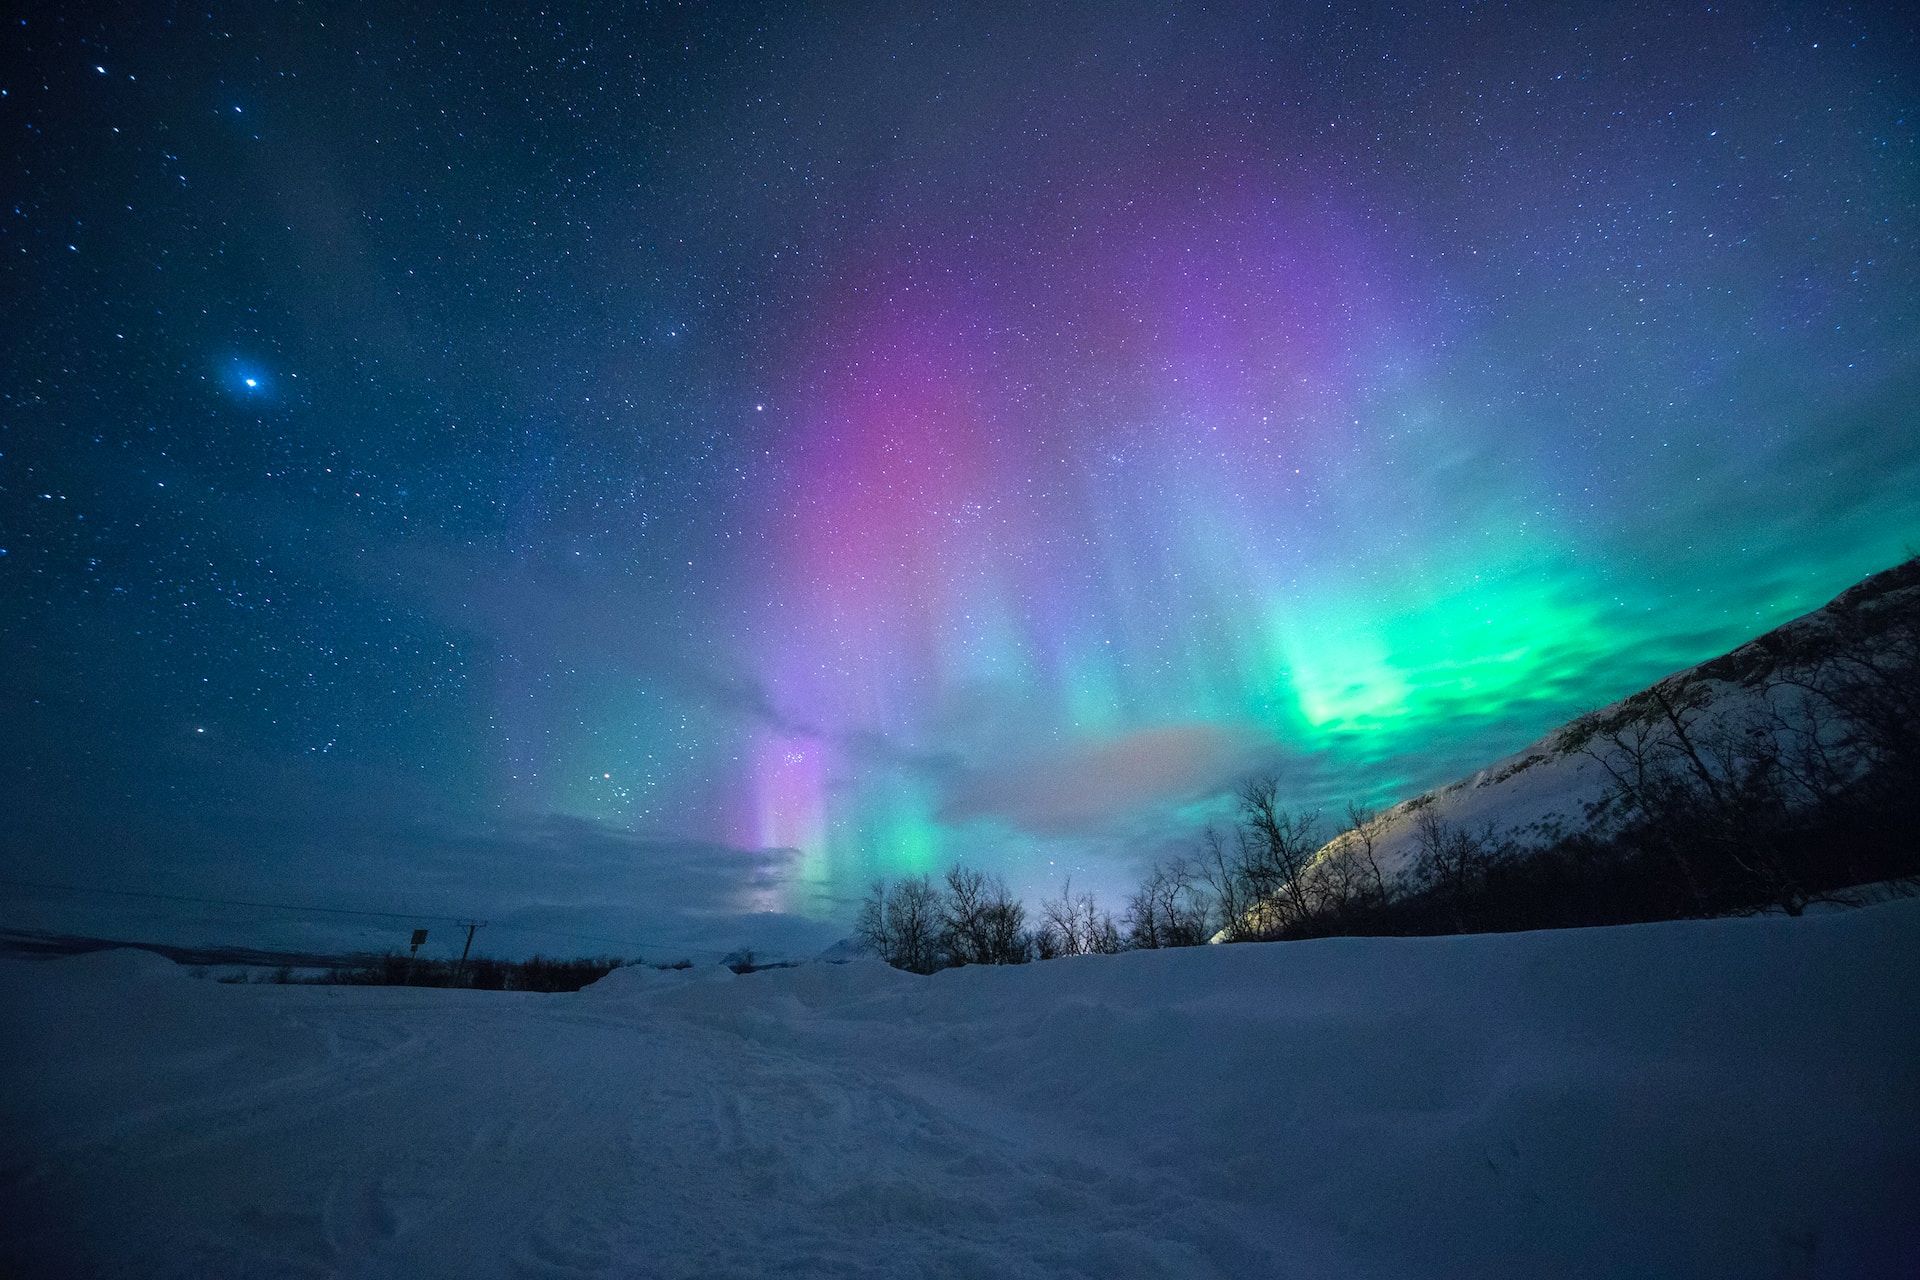 A stunning display of the northern lights in Tromsø, Norway during the winter 